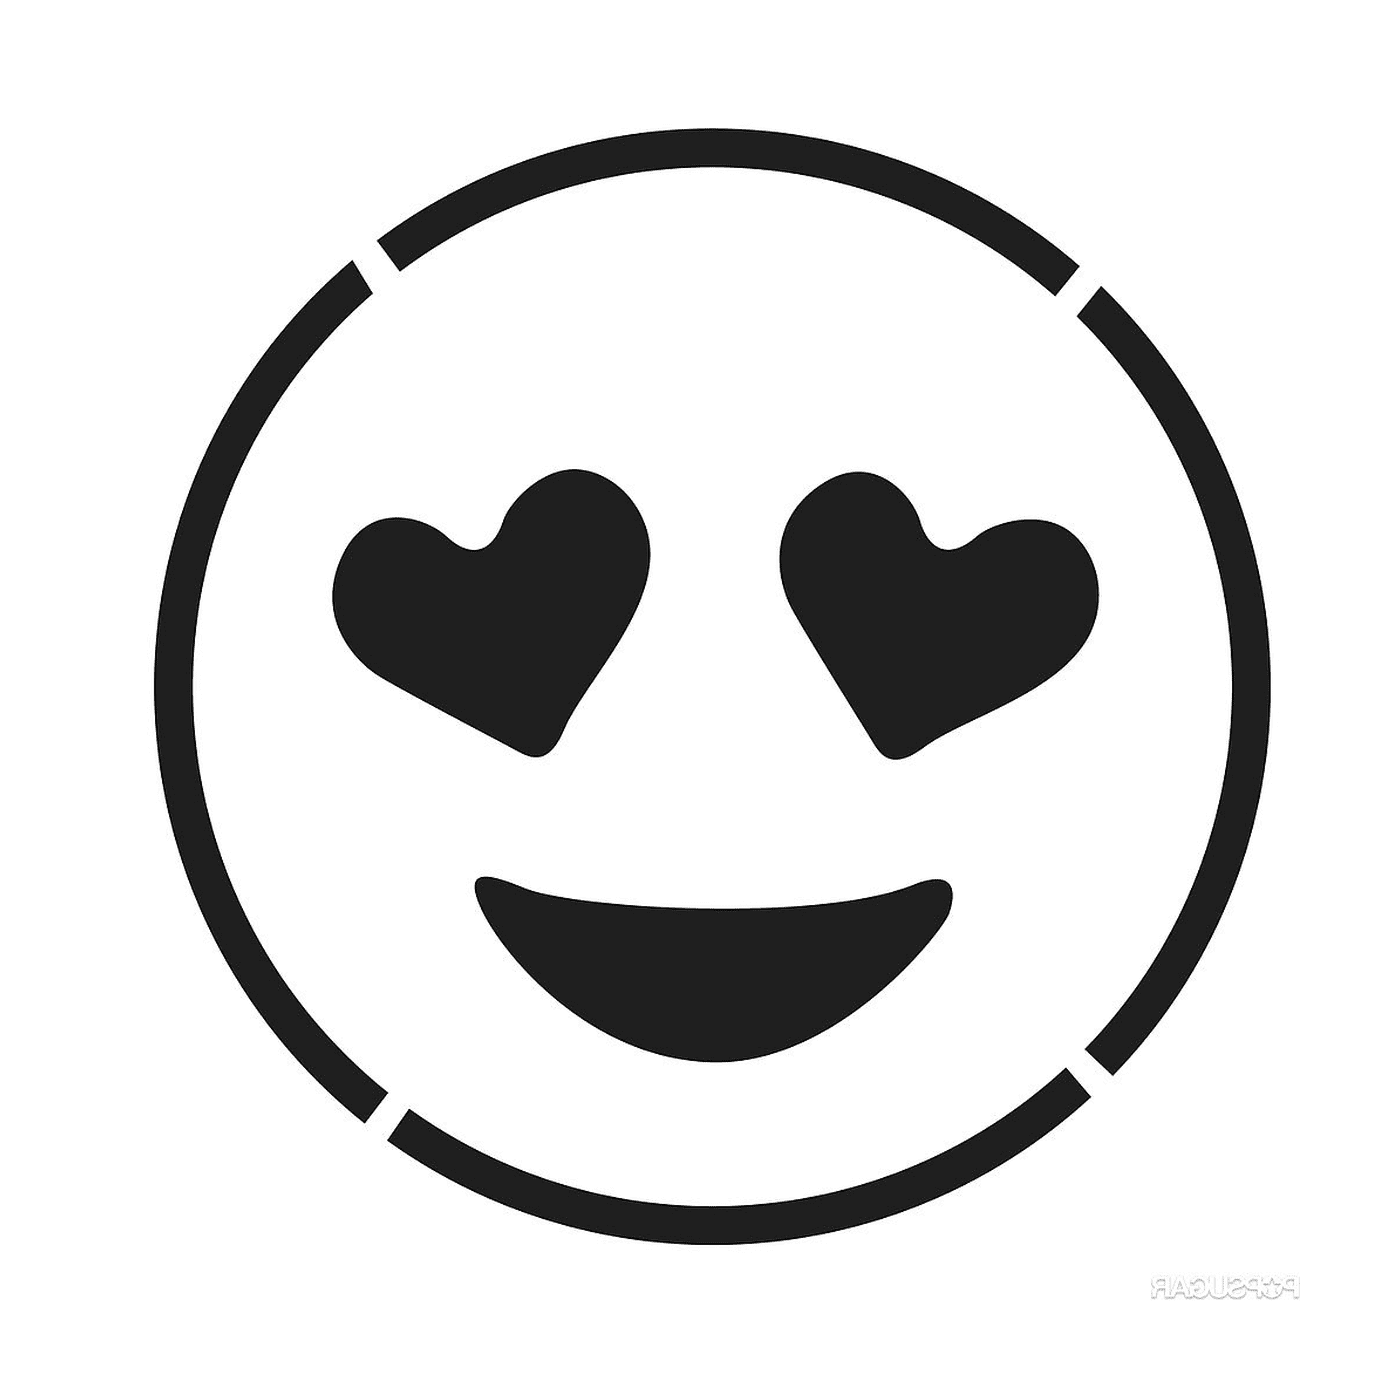  A smiling face with black and white hearts 